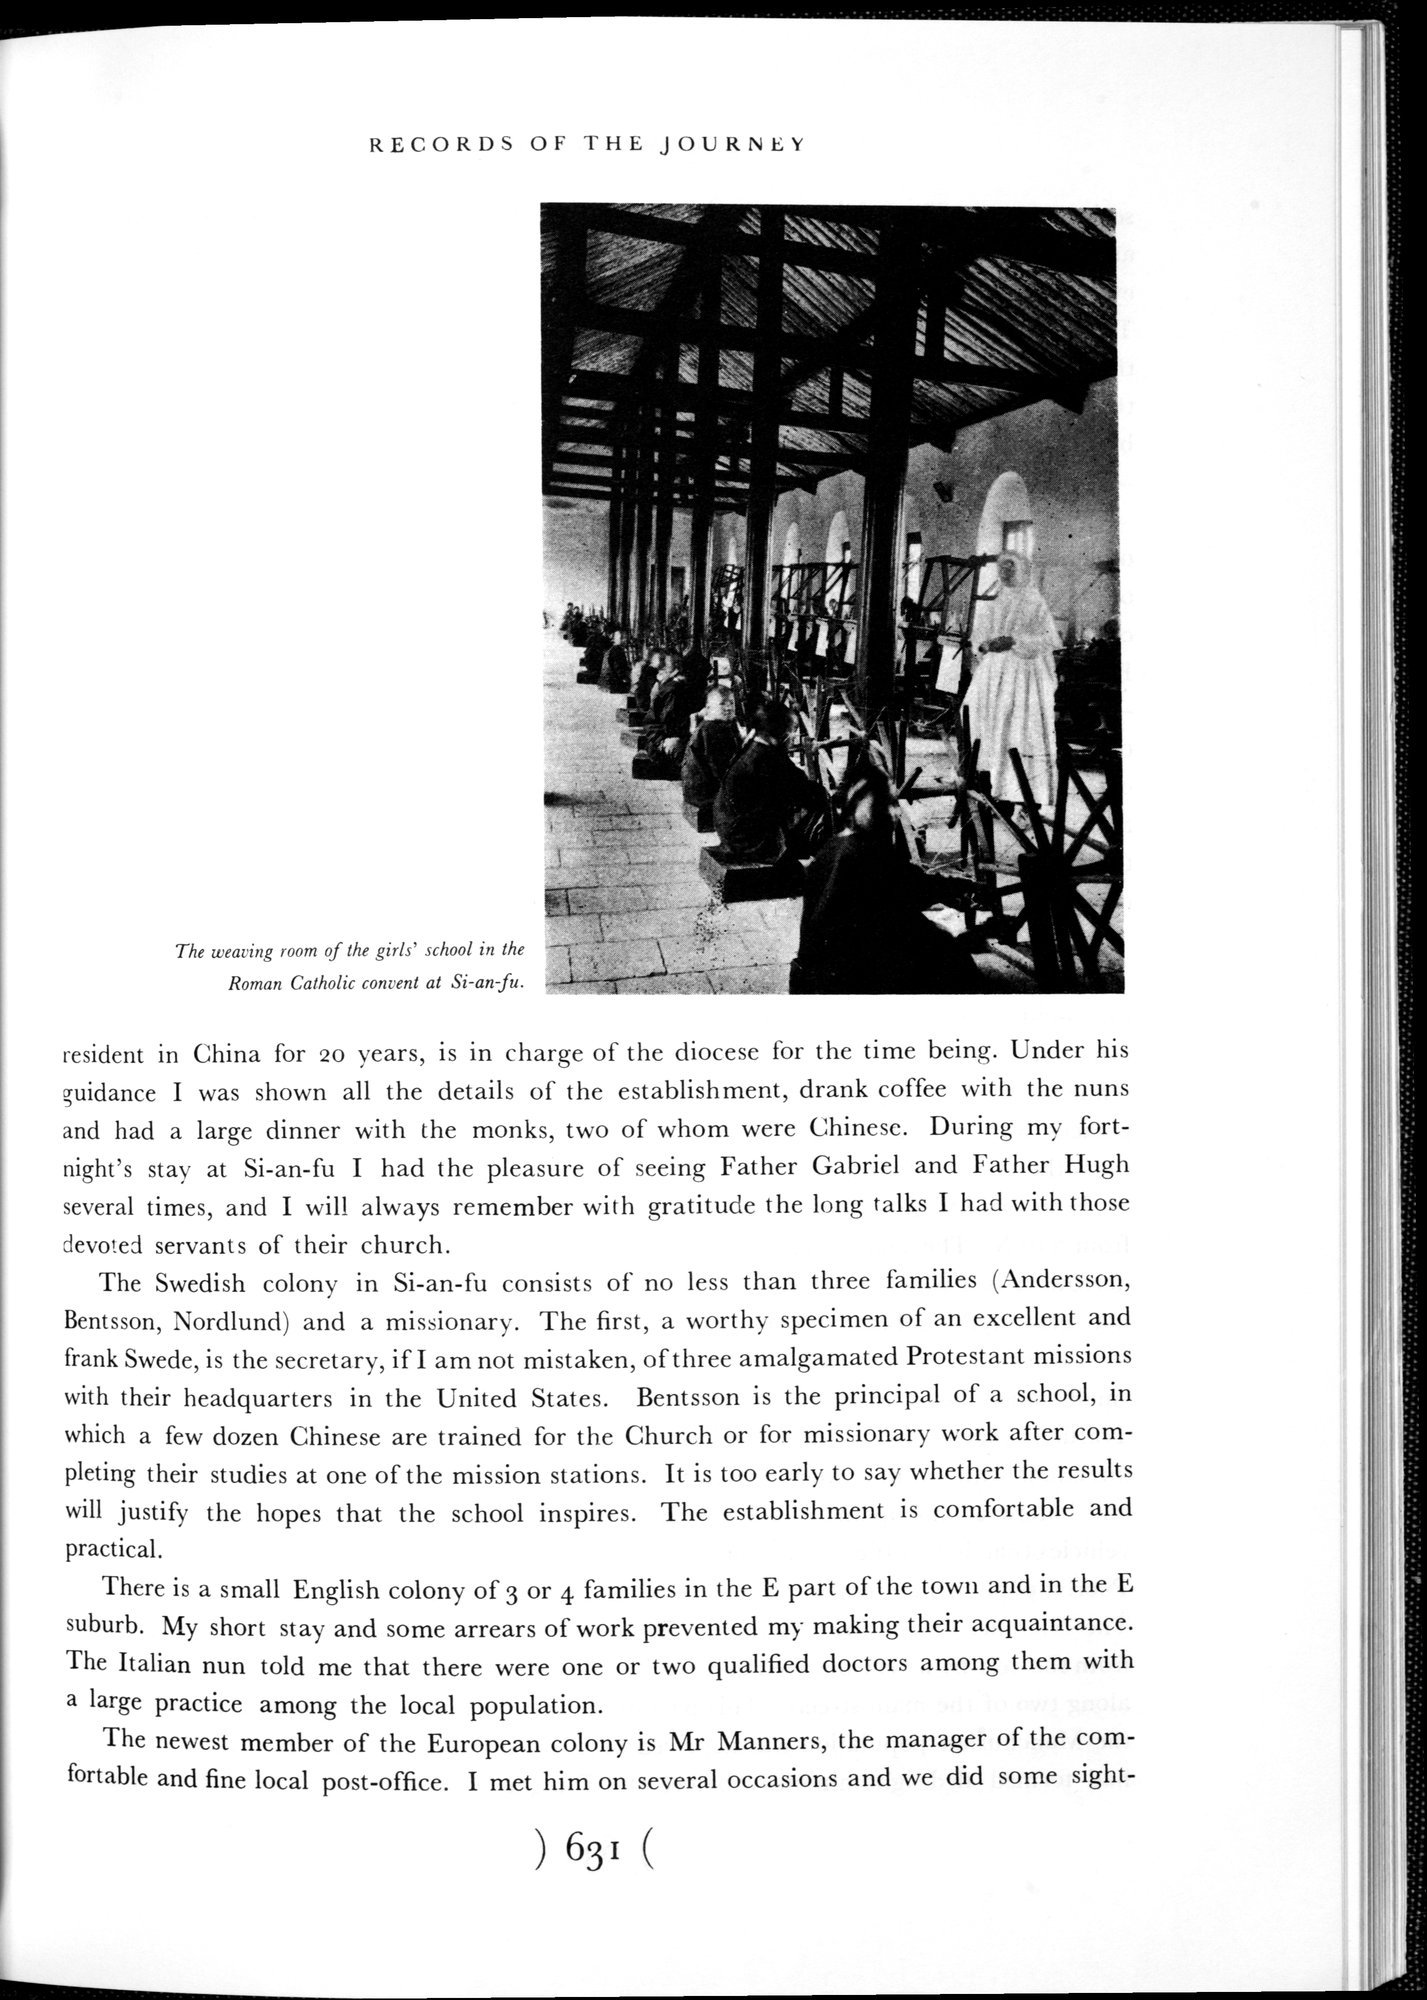 Across Asia : vol.1 / Page 637 (Grayscale High Resolution Image)